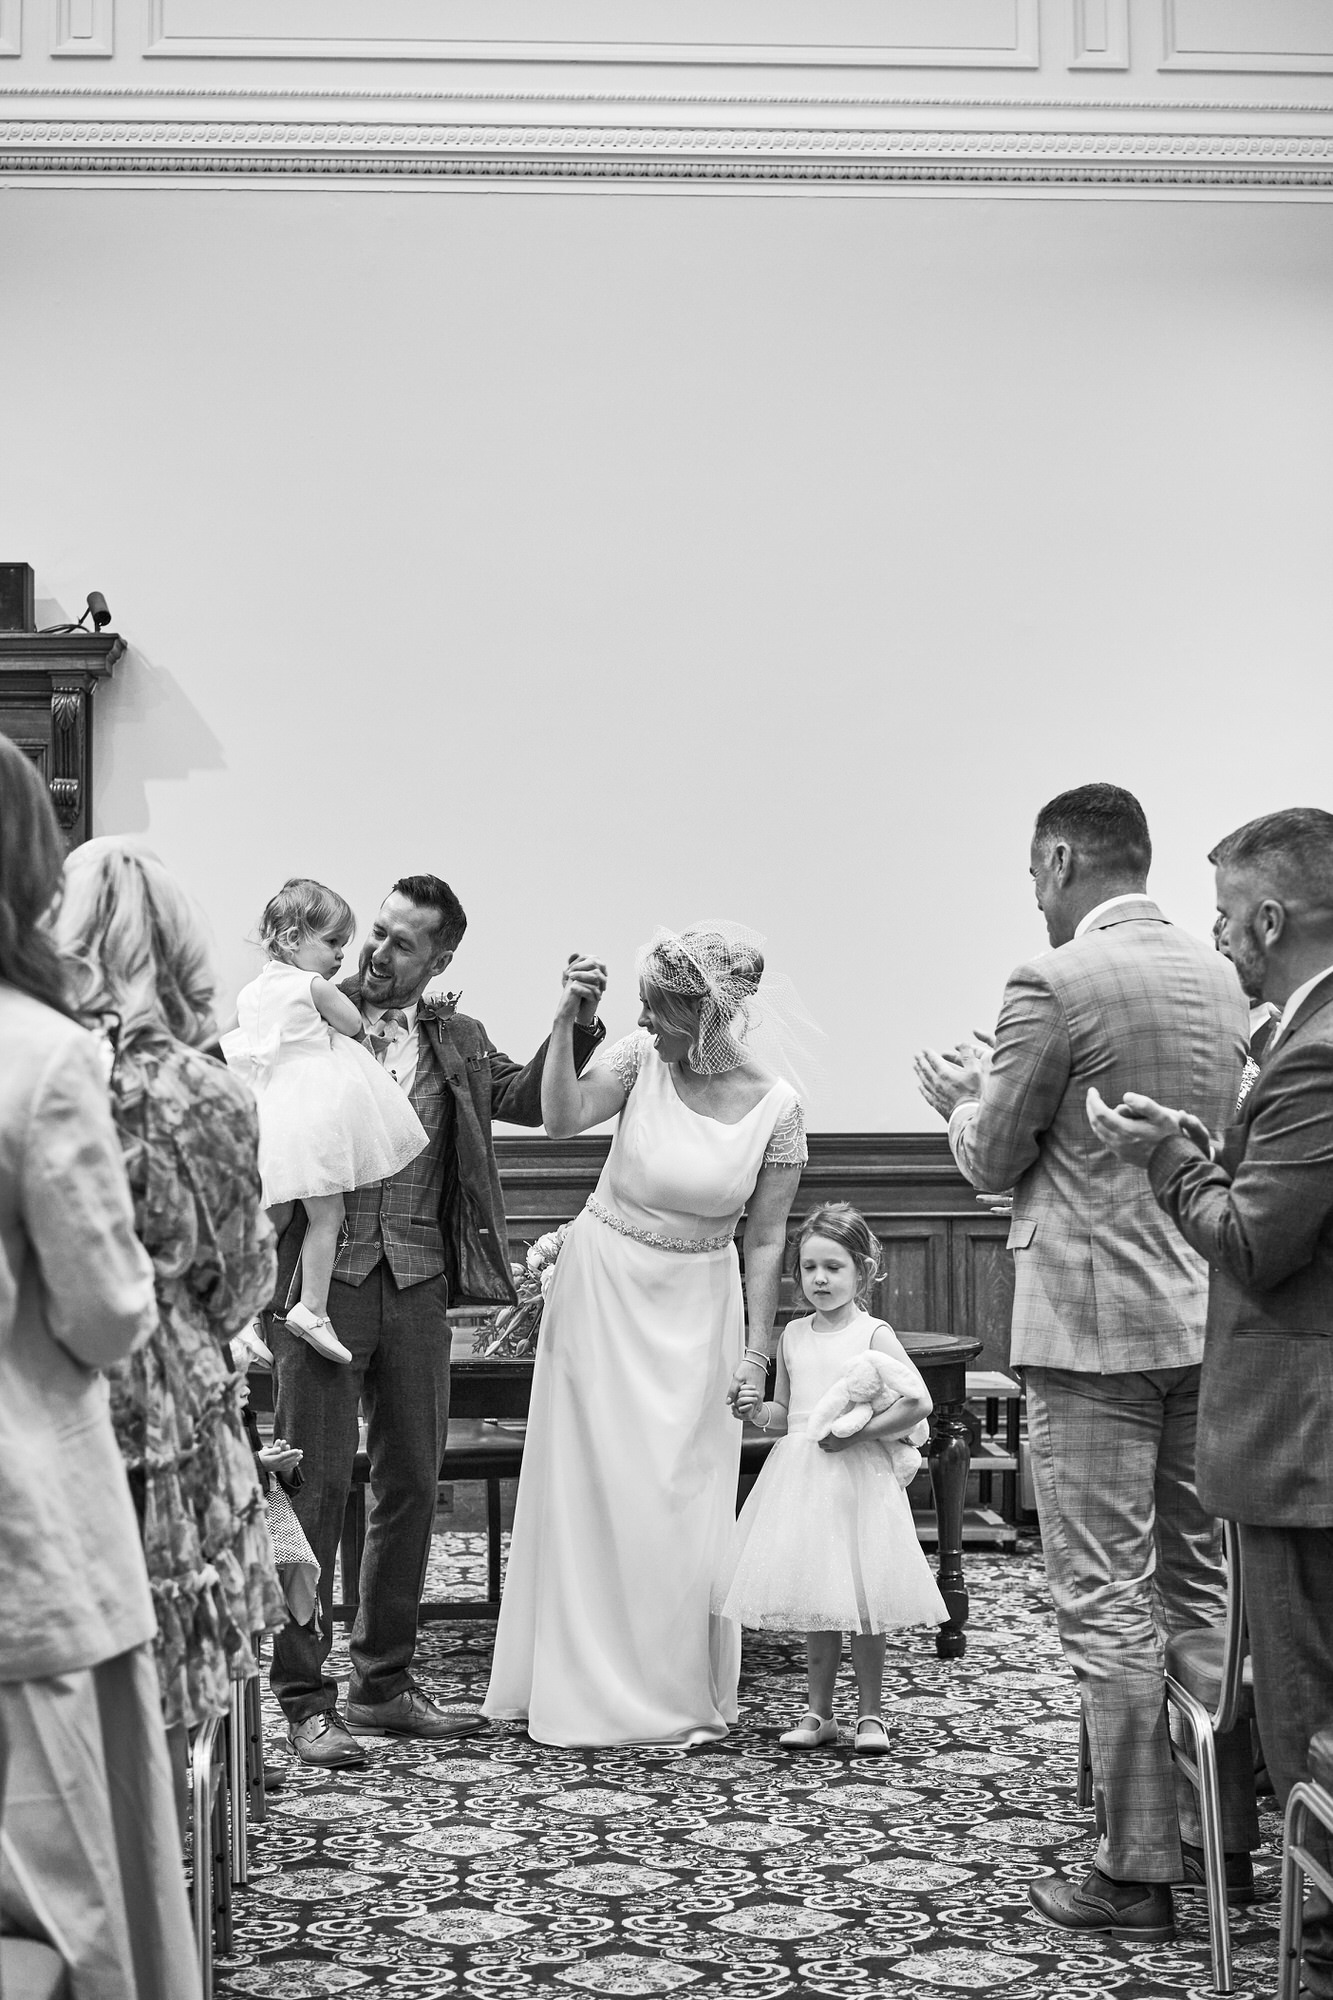 the couple cheer with their children as they're now married!